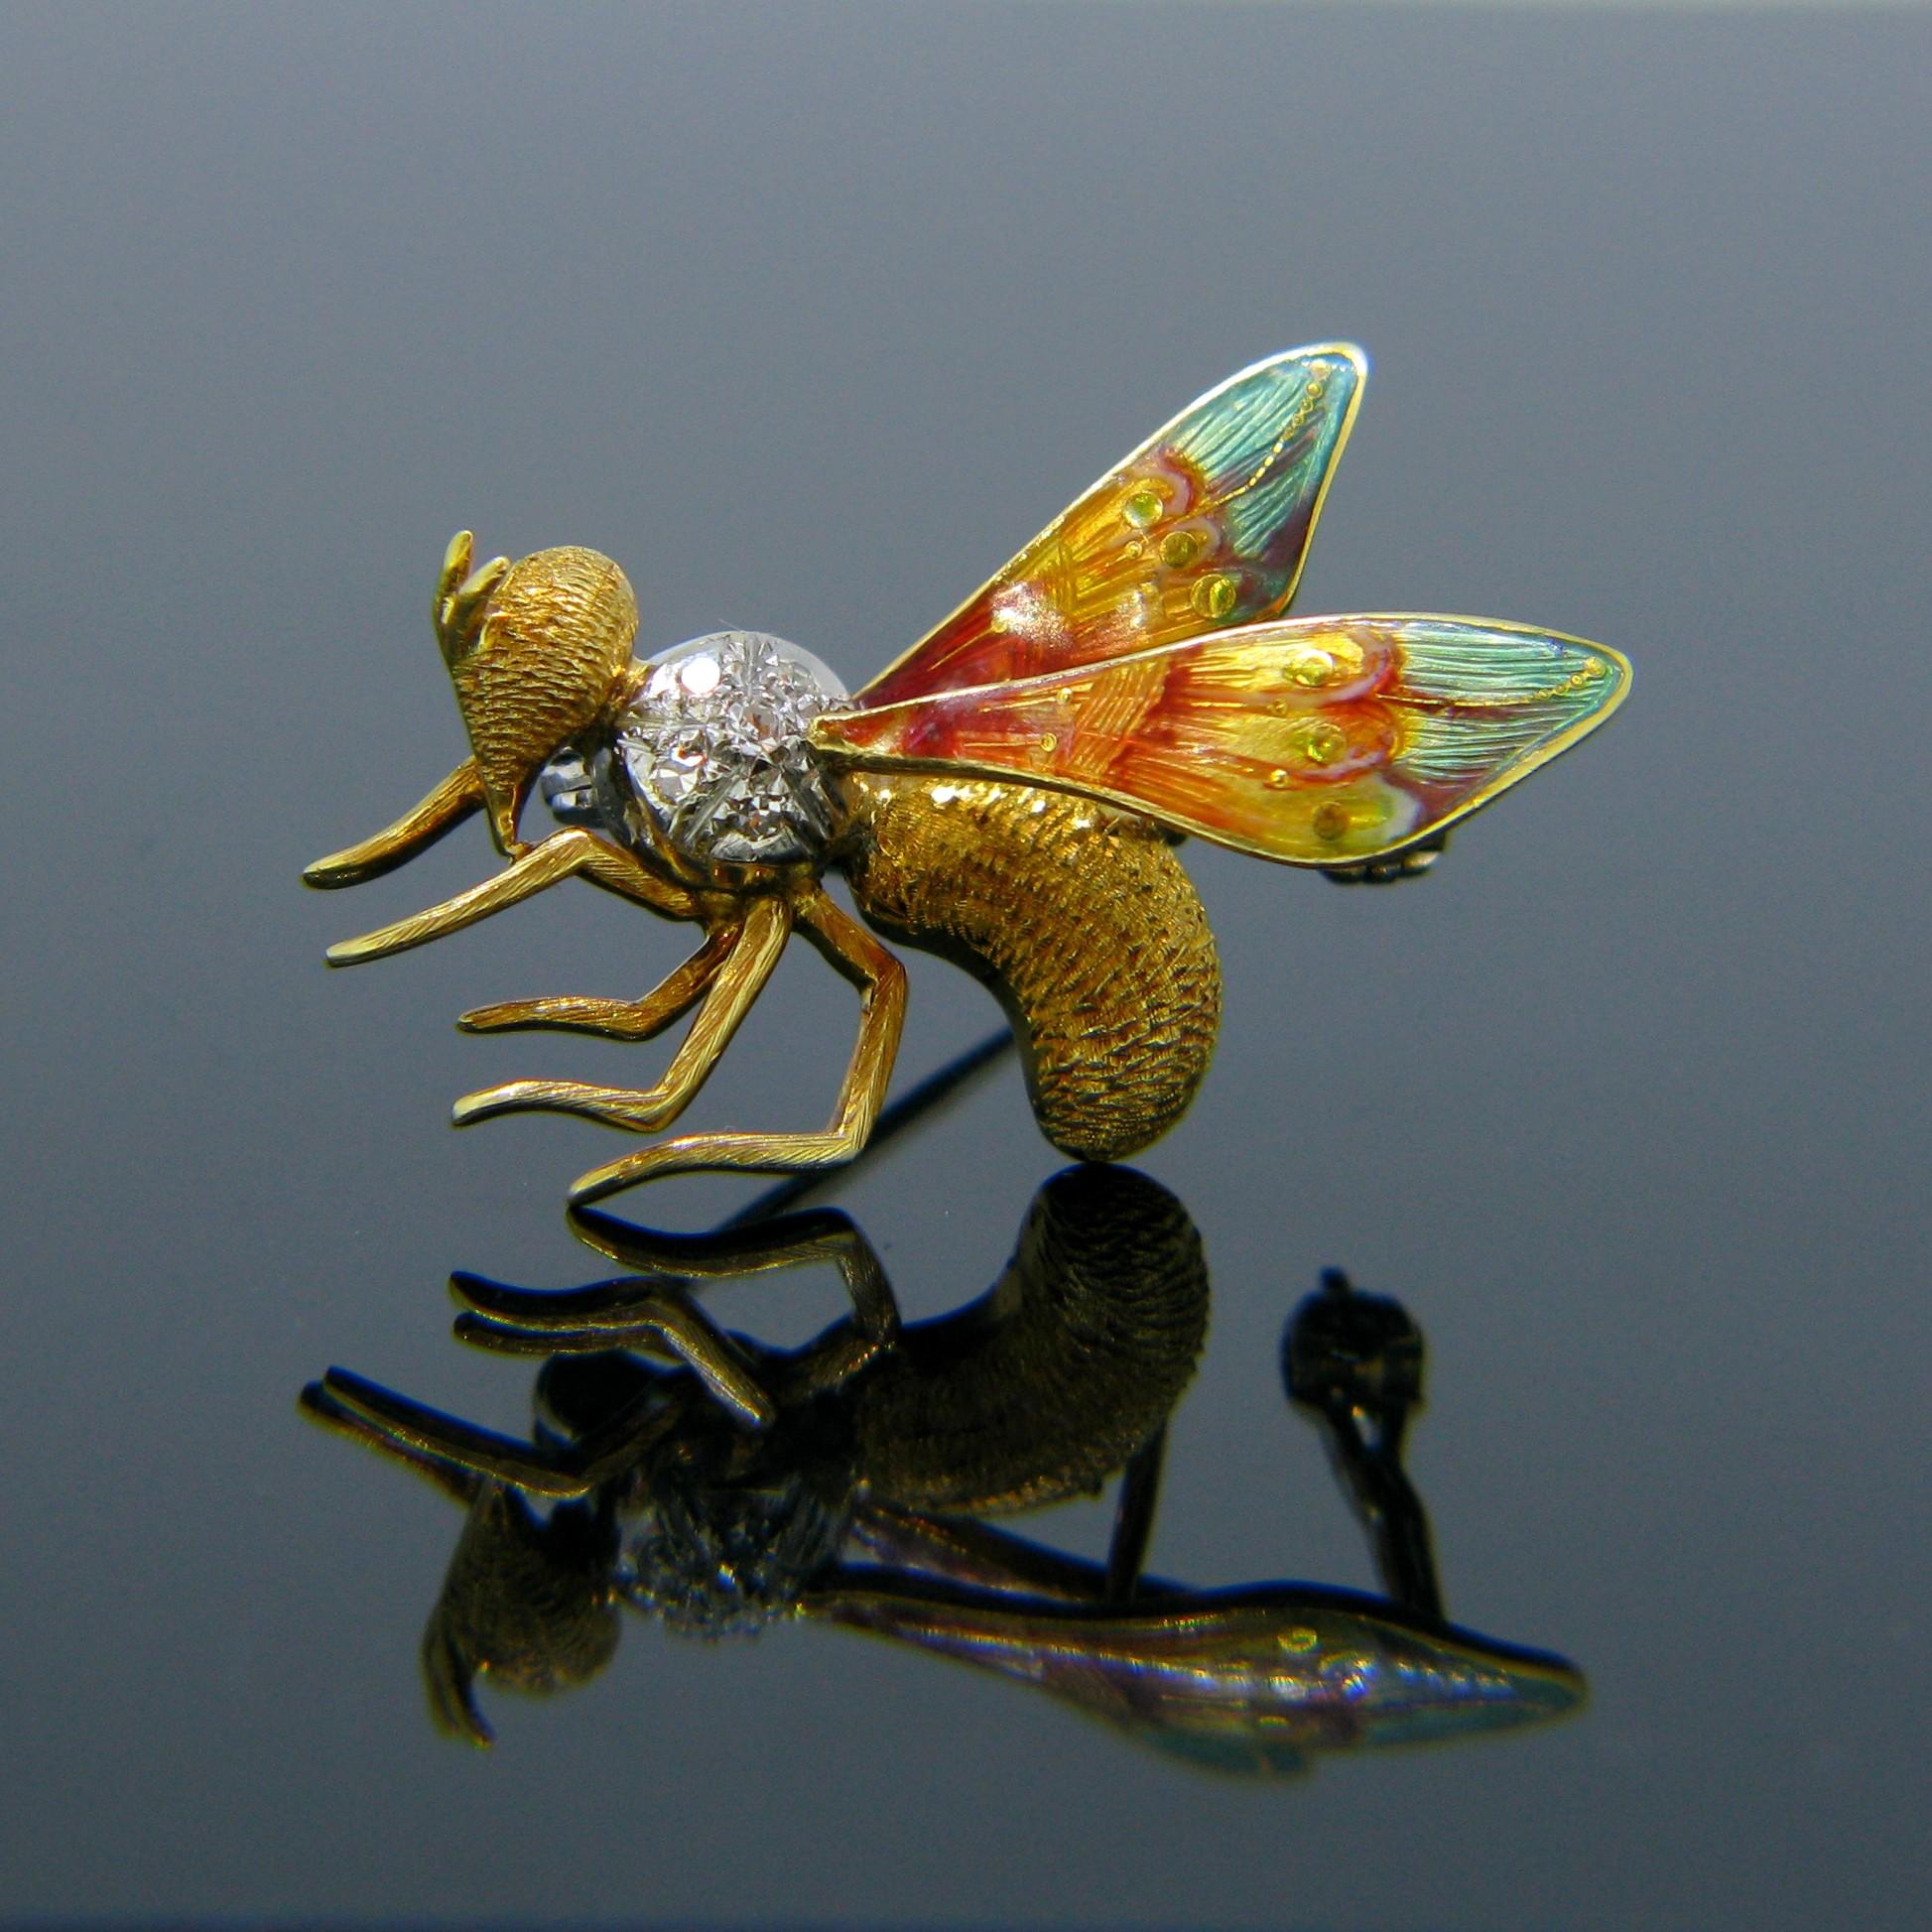 This beautiful brooch represents a wasp; it is set with 5 single cut diamonds and the wings feature vibrant colours of orange, yellow and green enamel. The enamel is in good condition. It is fully made in 18kt yellow gold and the diamonds are set in